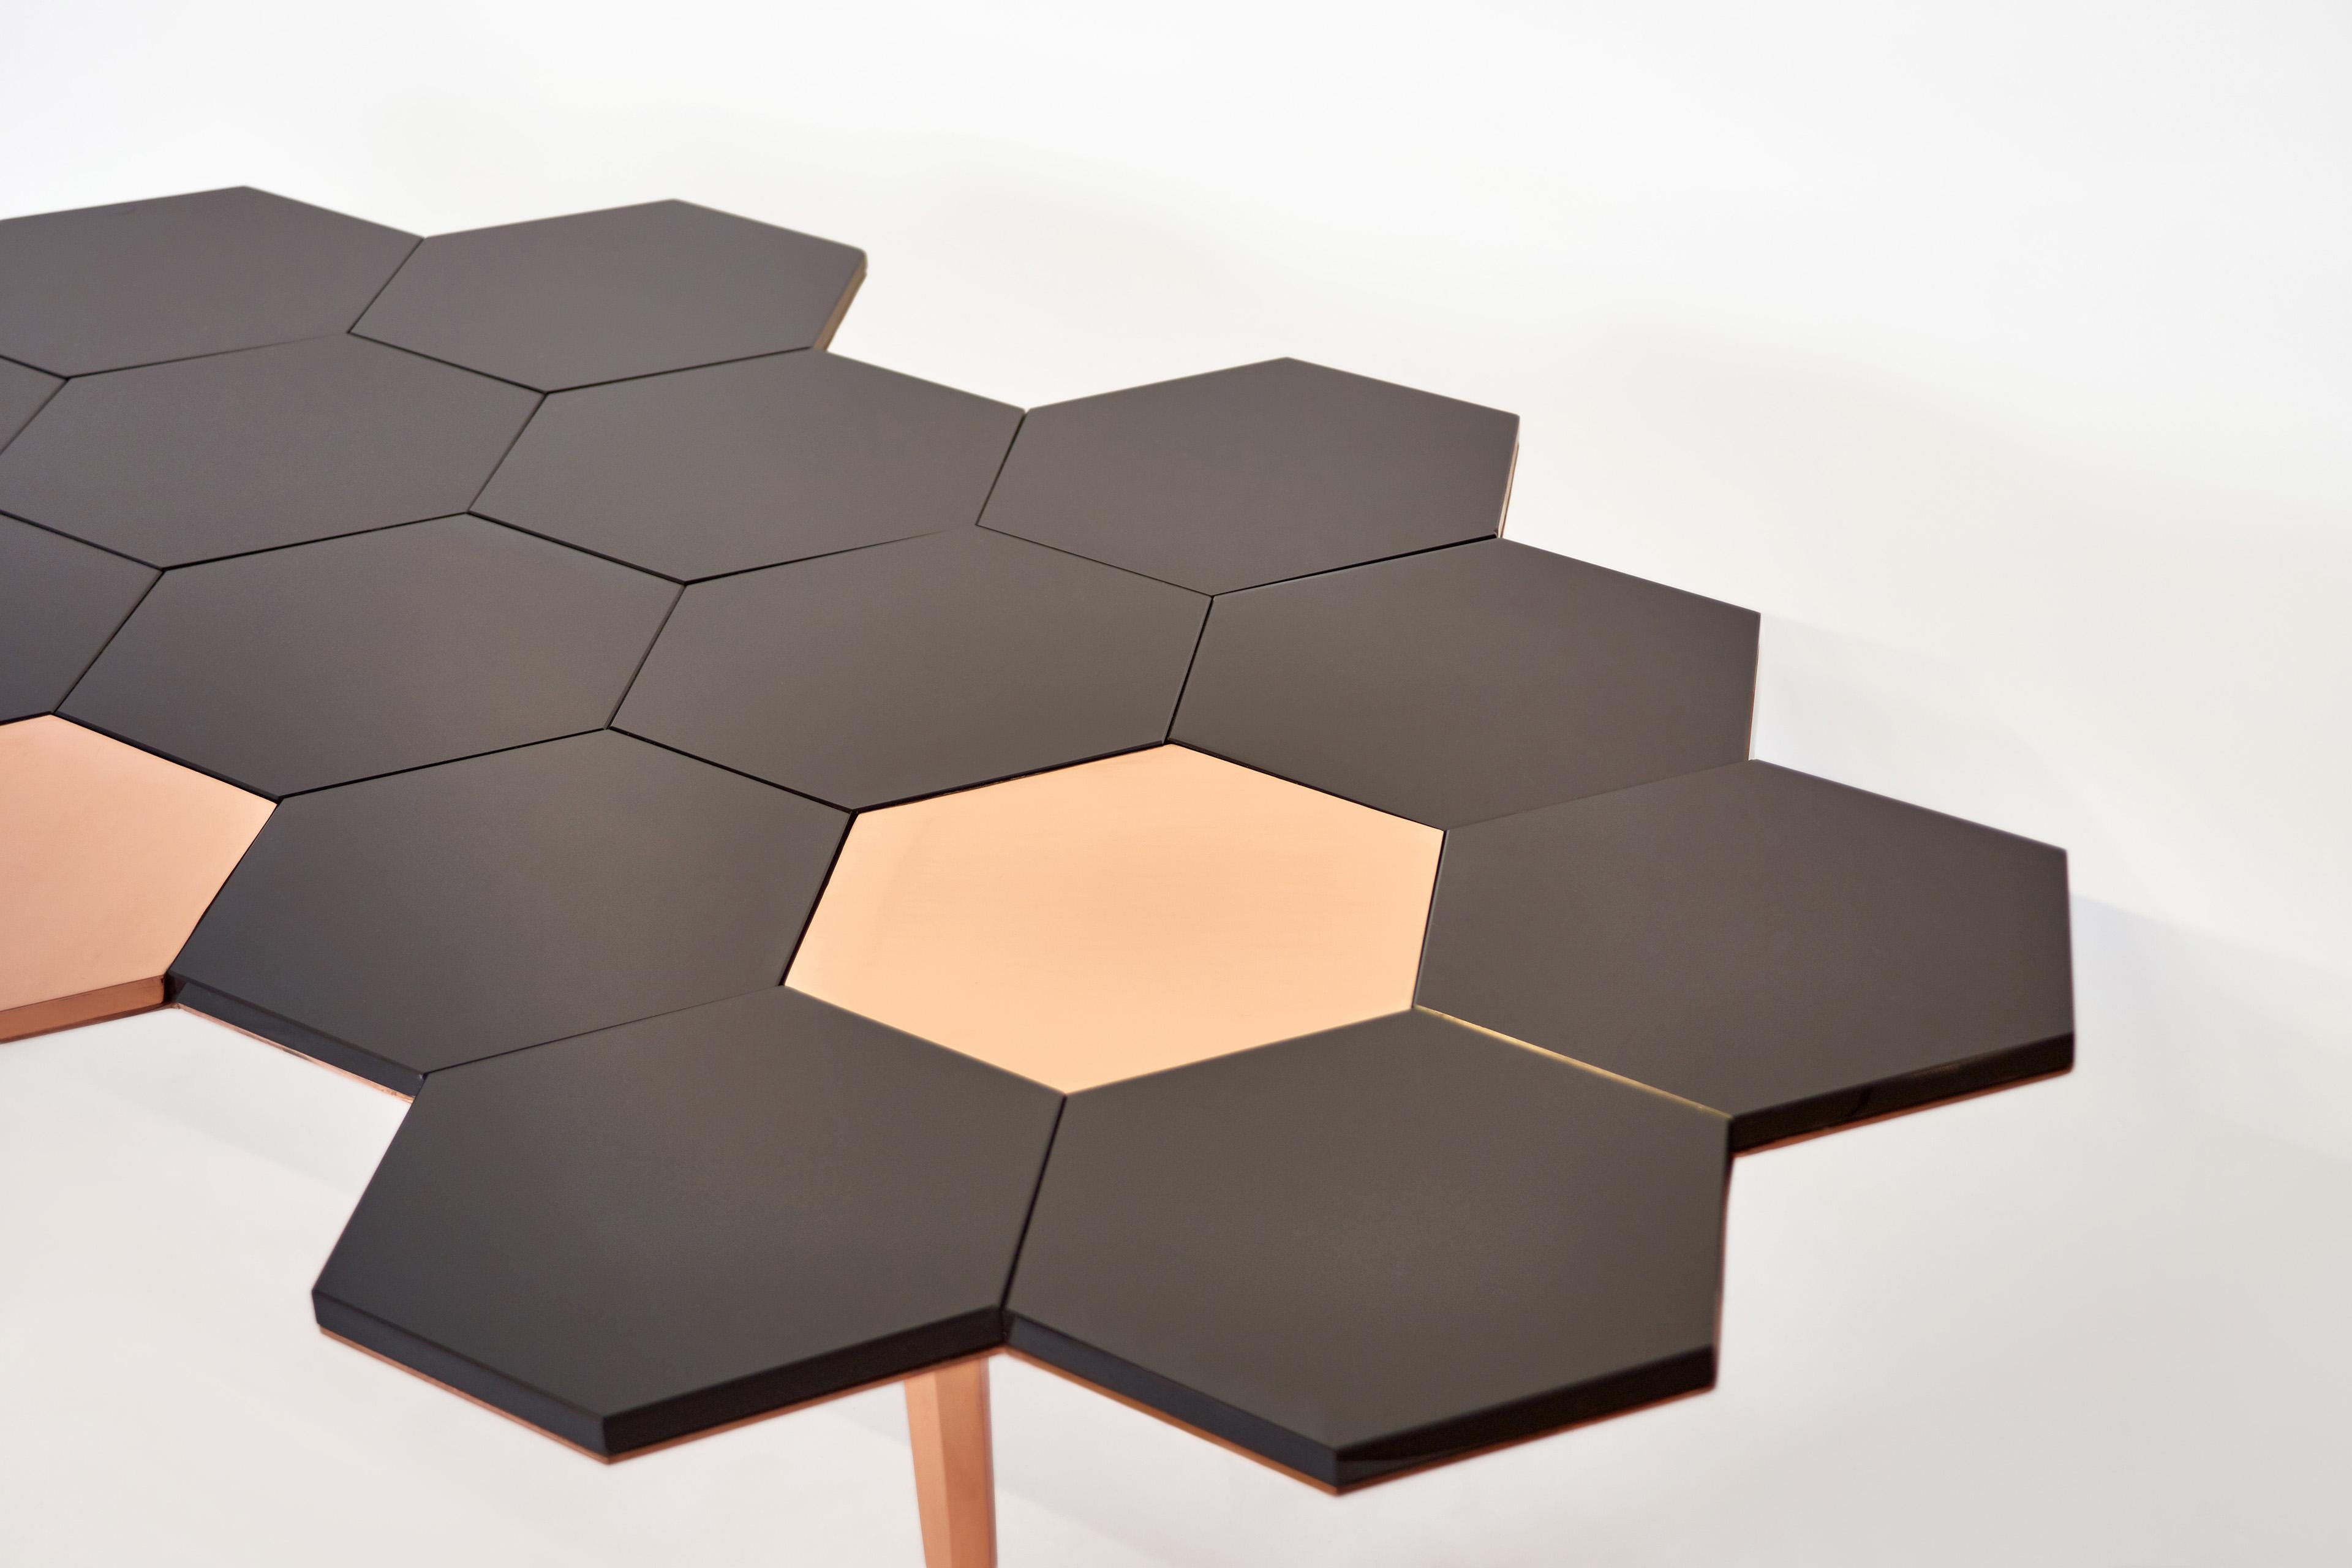 Contemporary Honeycomb Coffee Table by Sten Studio, Represented by Tuleste Factory